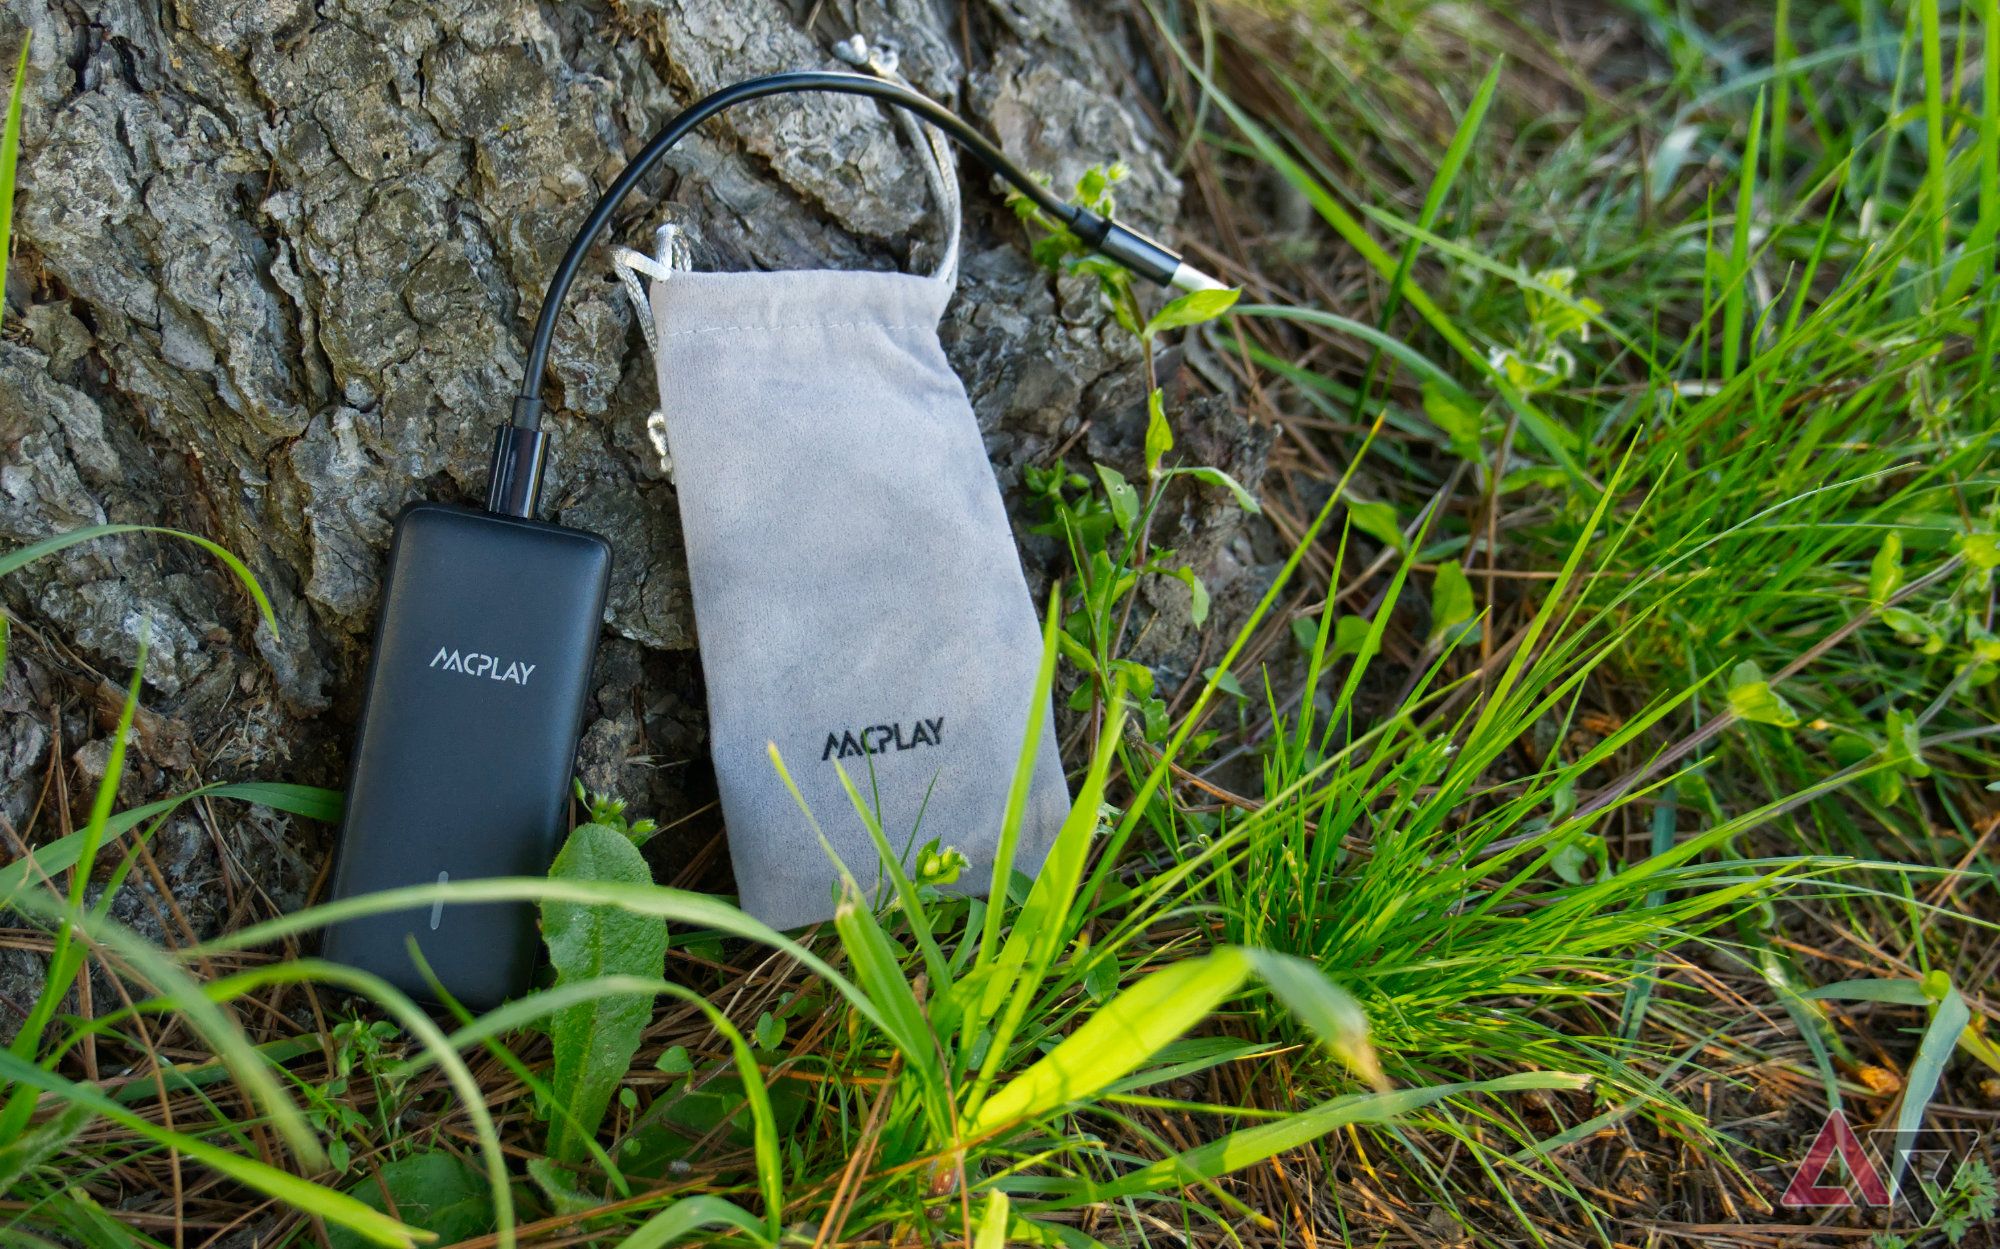 AACPlay wireless adapter and carrying pouch resting against the base of a tree amidst some blades of grass lit up by the afternoon sun